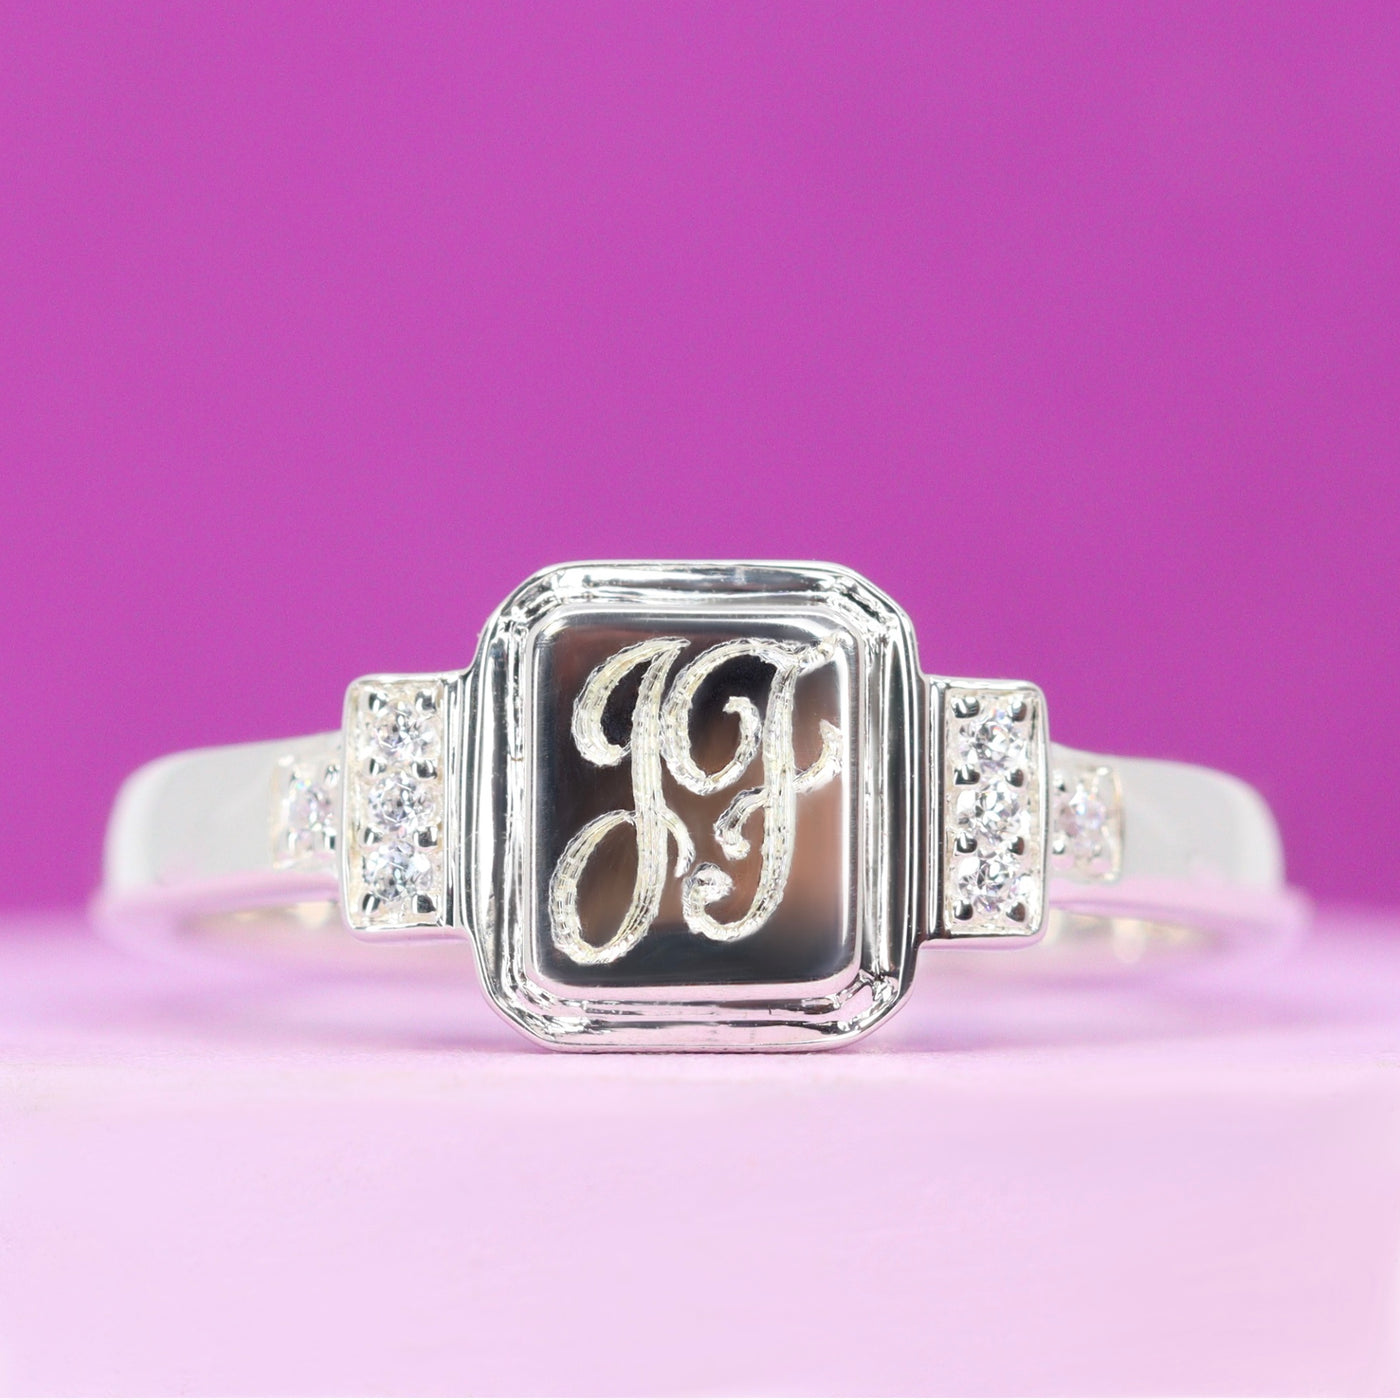 Greyson - The Euphoria Collection - Signet Ring with Diamond Set Side Bars - Made-to-Order